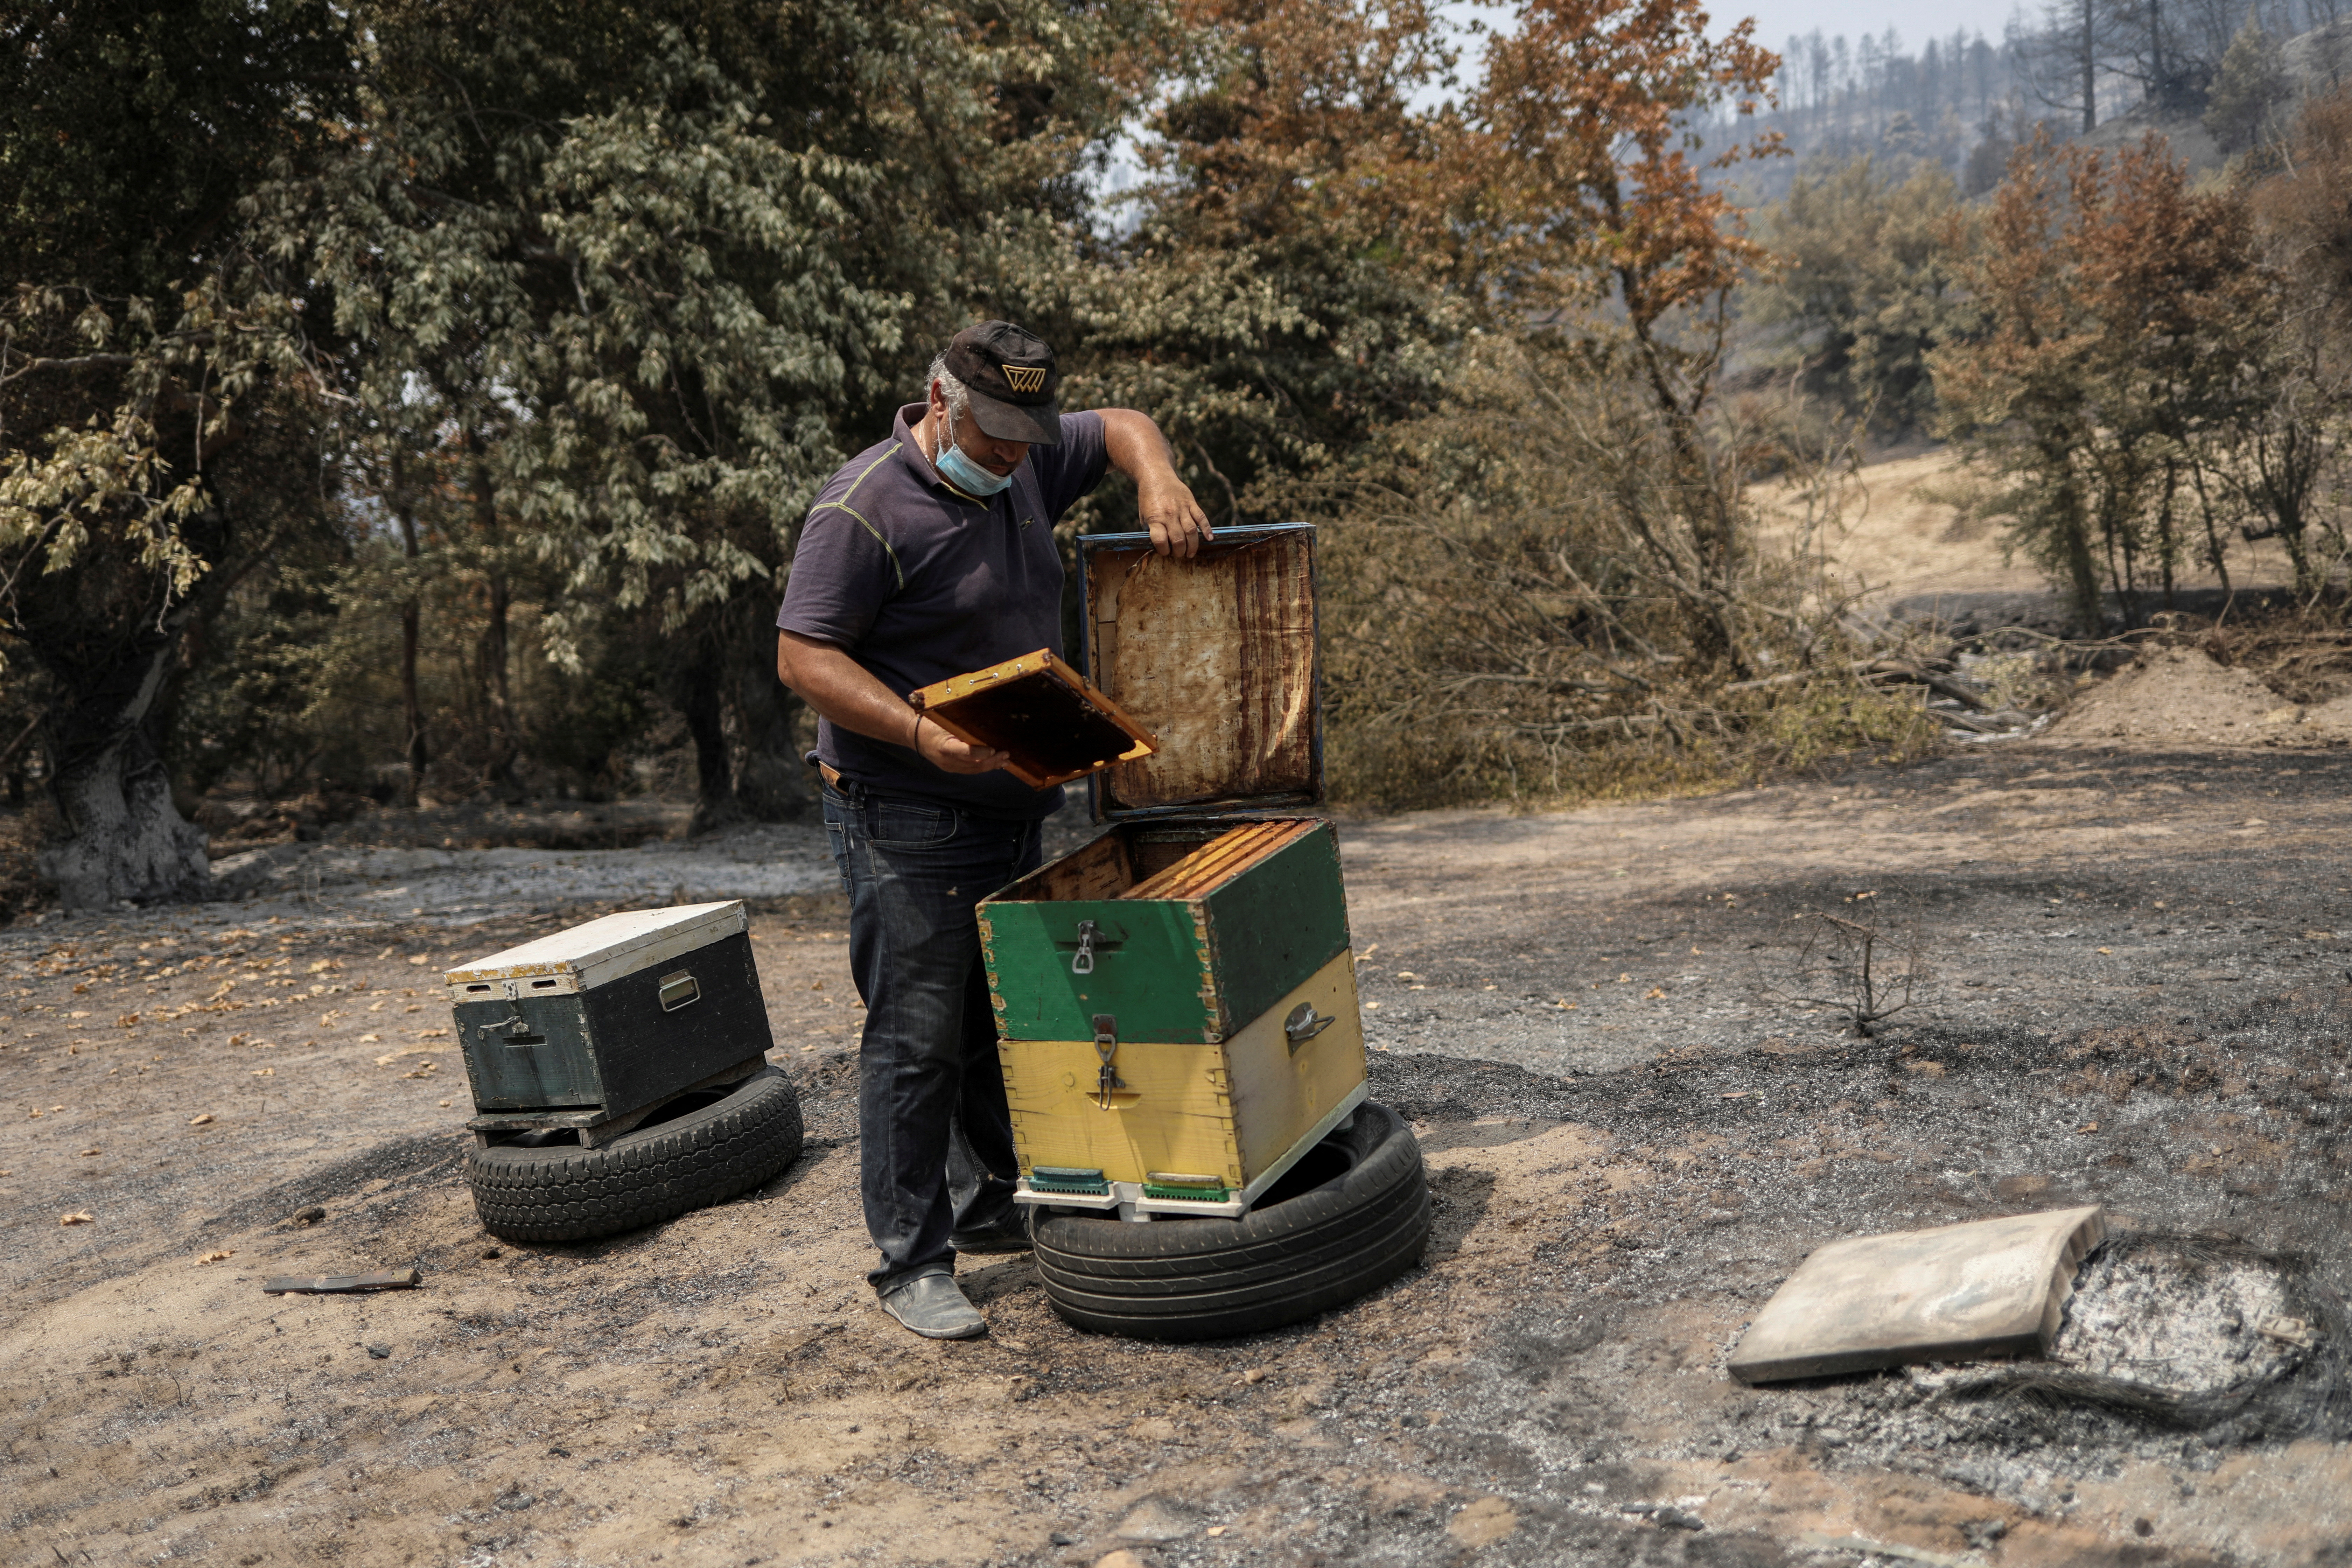 Beekeeper Antonis Vakos, 49, checks a beehive next to other destroyed beehives, following a wildfire near the village of Voutas on the island of Evia